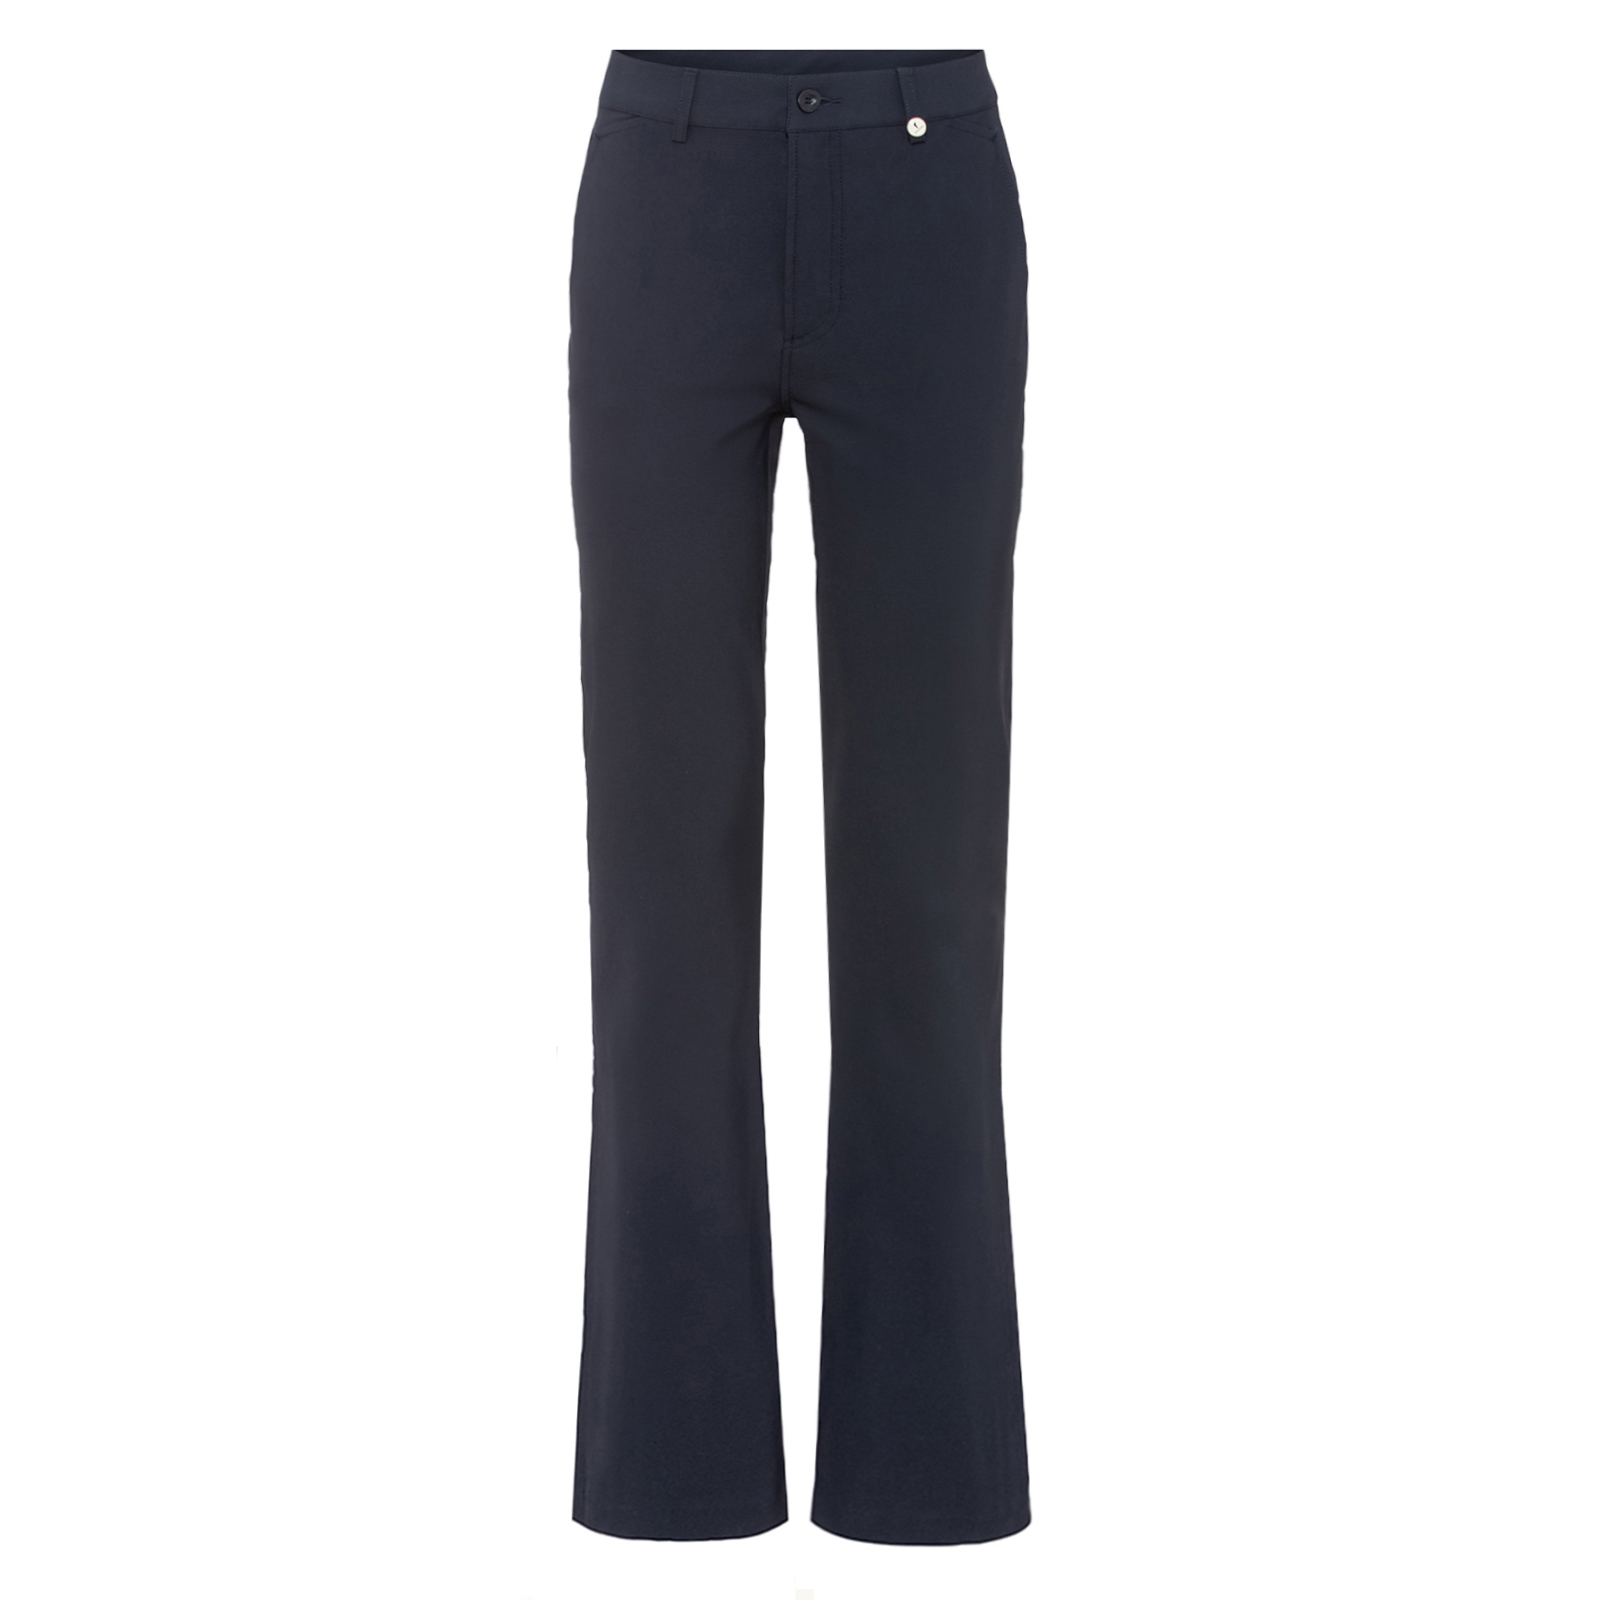 Ladies' 4-way stretch boot-cut golf trousers